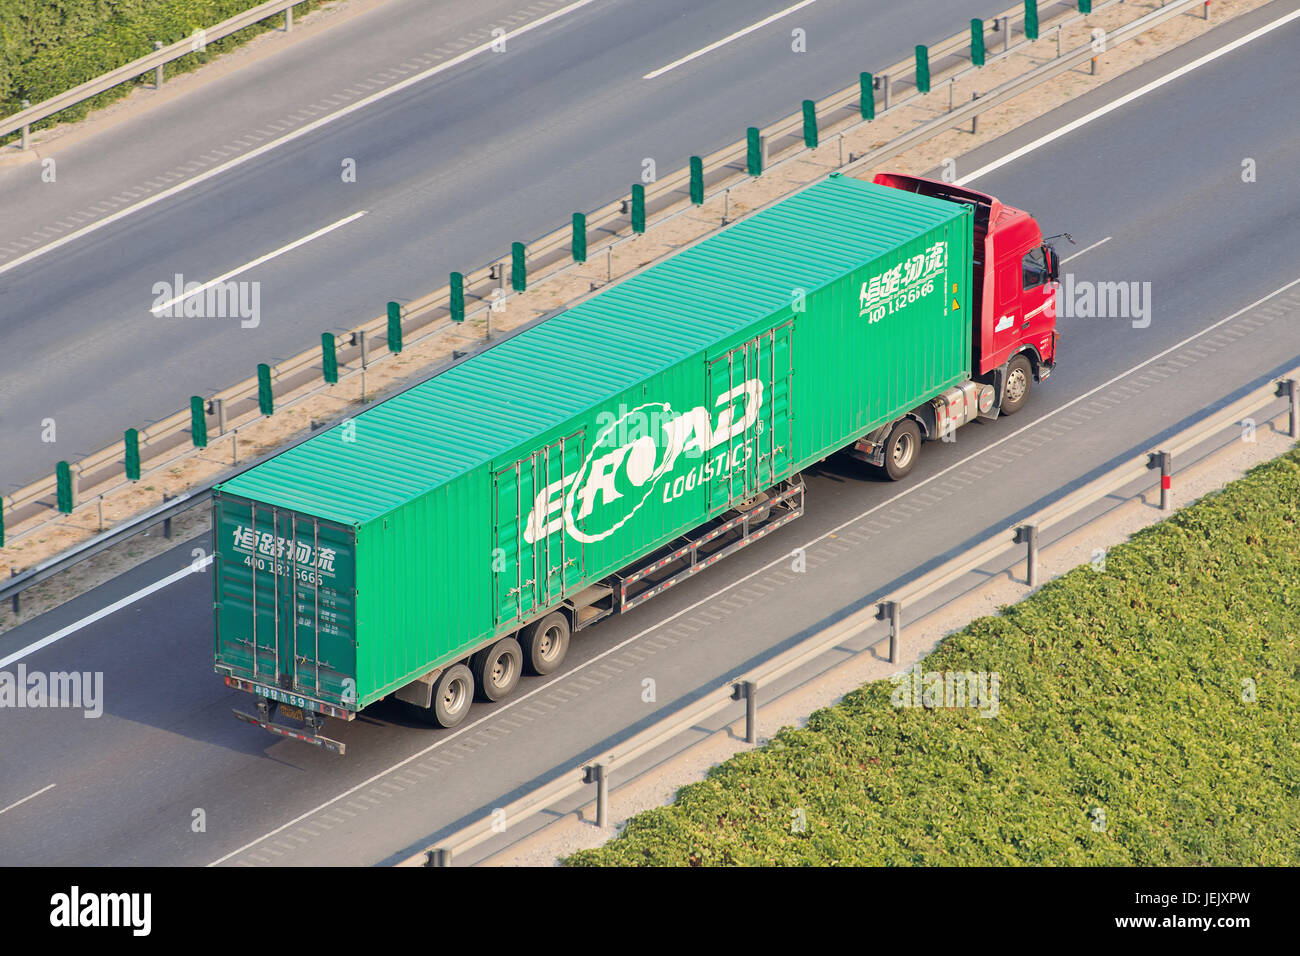 BEIJING-JULY 7, 2015. Chinese truck with Eroad Logistics container. ERoad, founded in 1993, is a Chinese transport and logistics company. Stock Photo